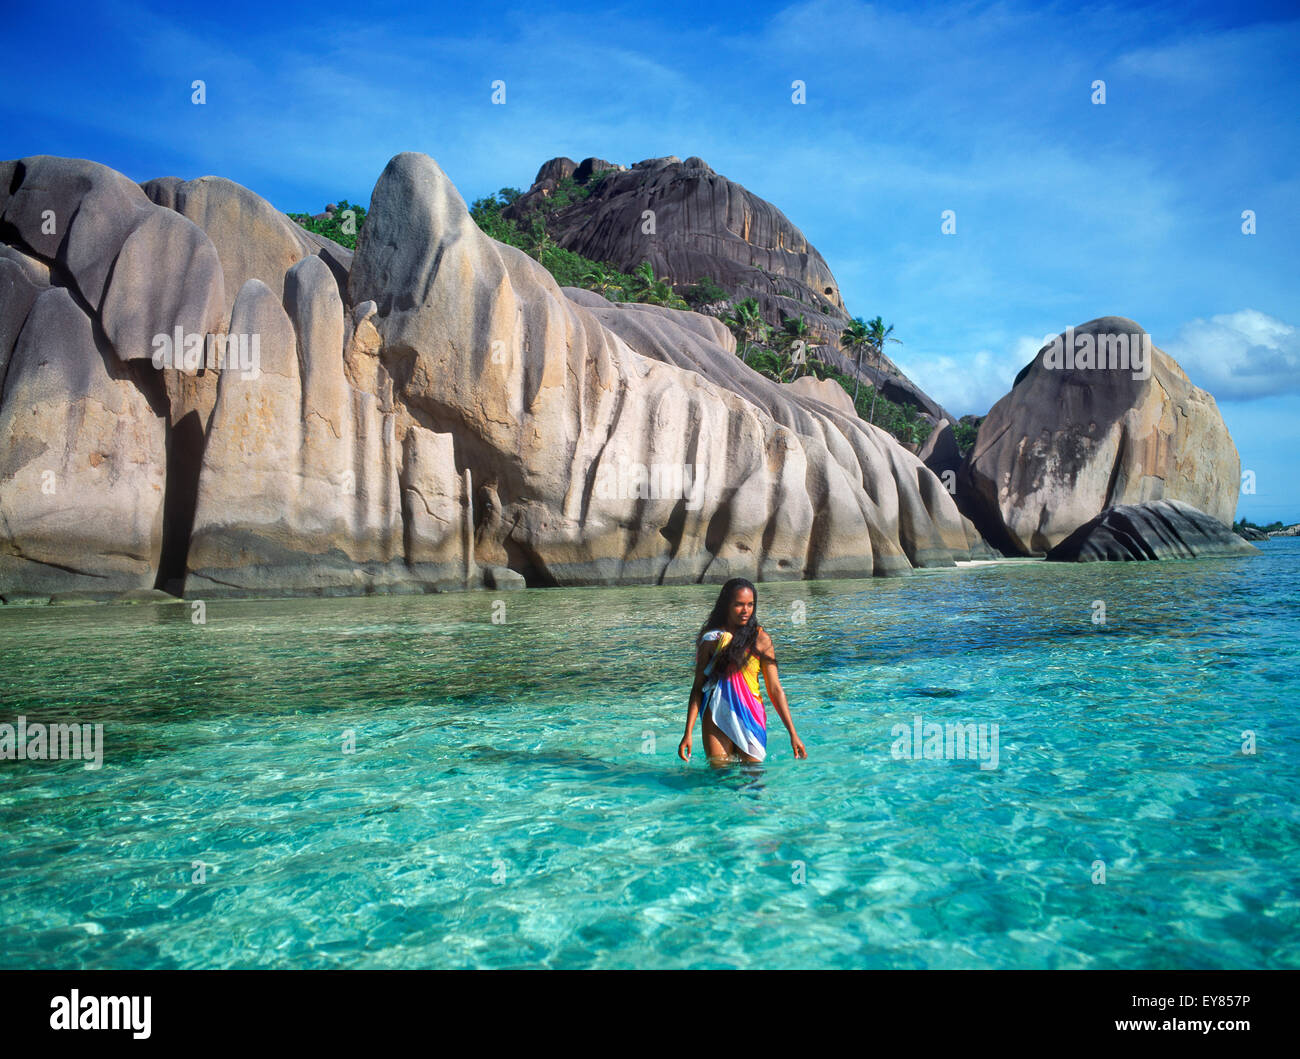 Native woman with colorful sarong walking in aqua waters at Anse Source d Argent on La Digue in Seychelles Stock Photo